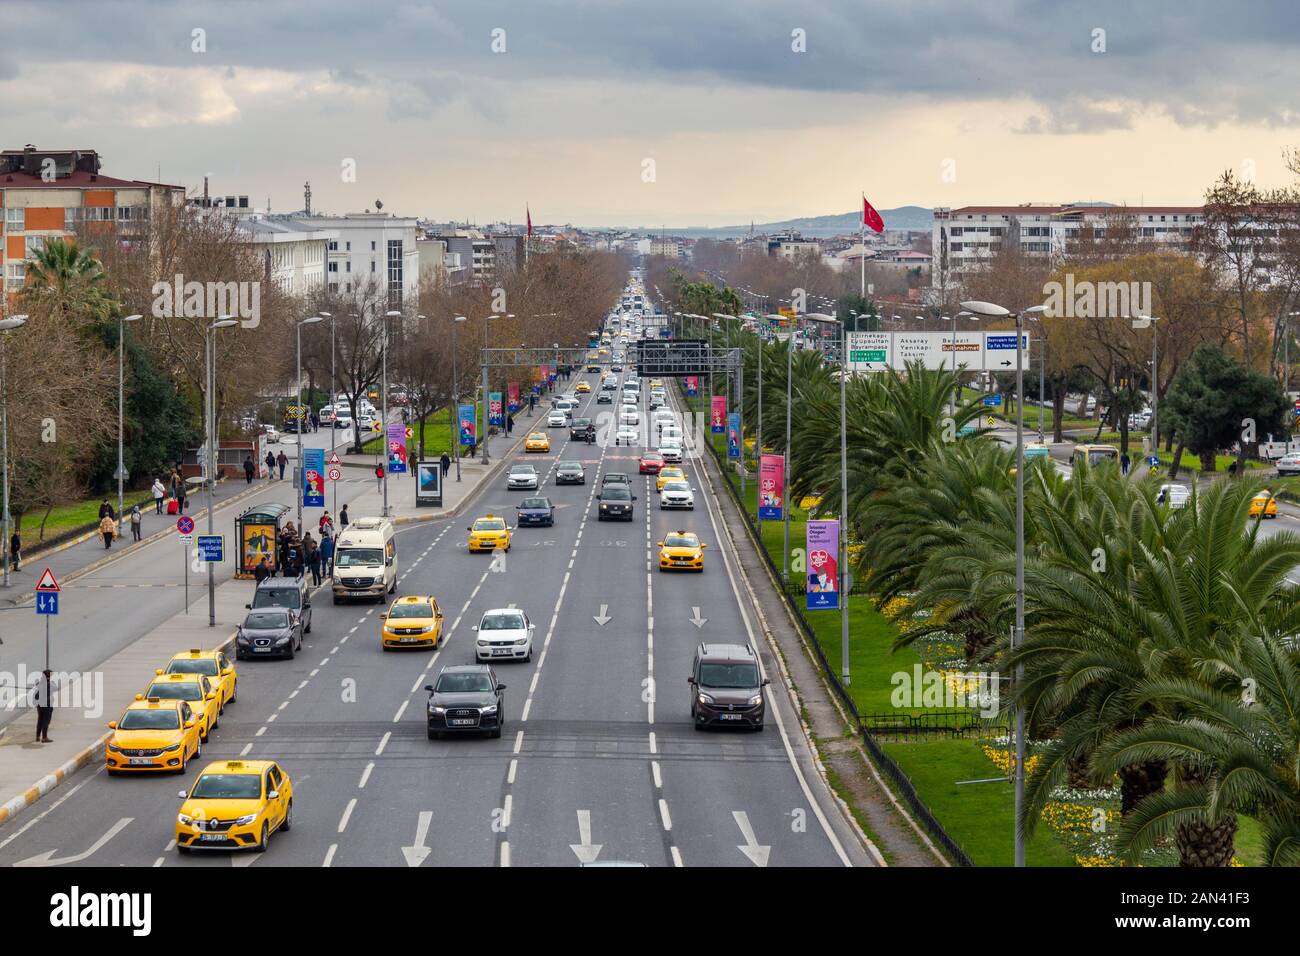 Istanbul Adnan Menderes Boulevard ( Vatan Street ) in daily life traffic and landscape Stock Photo